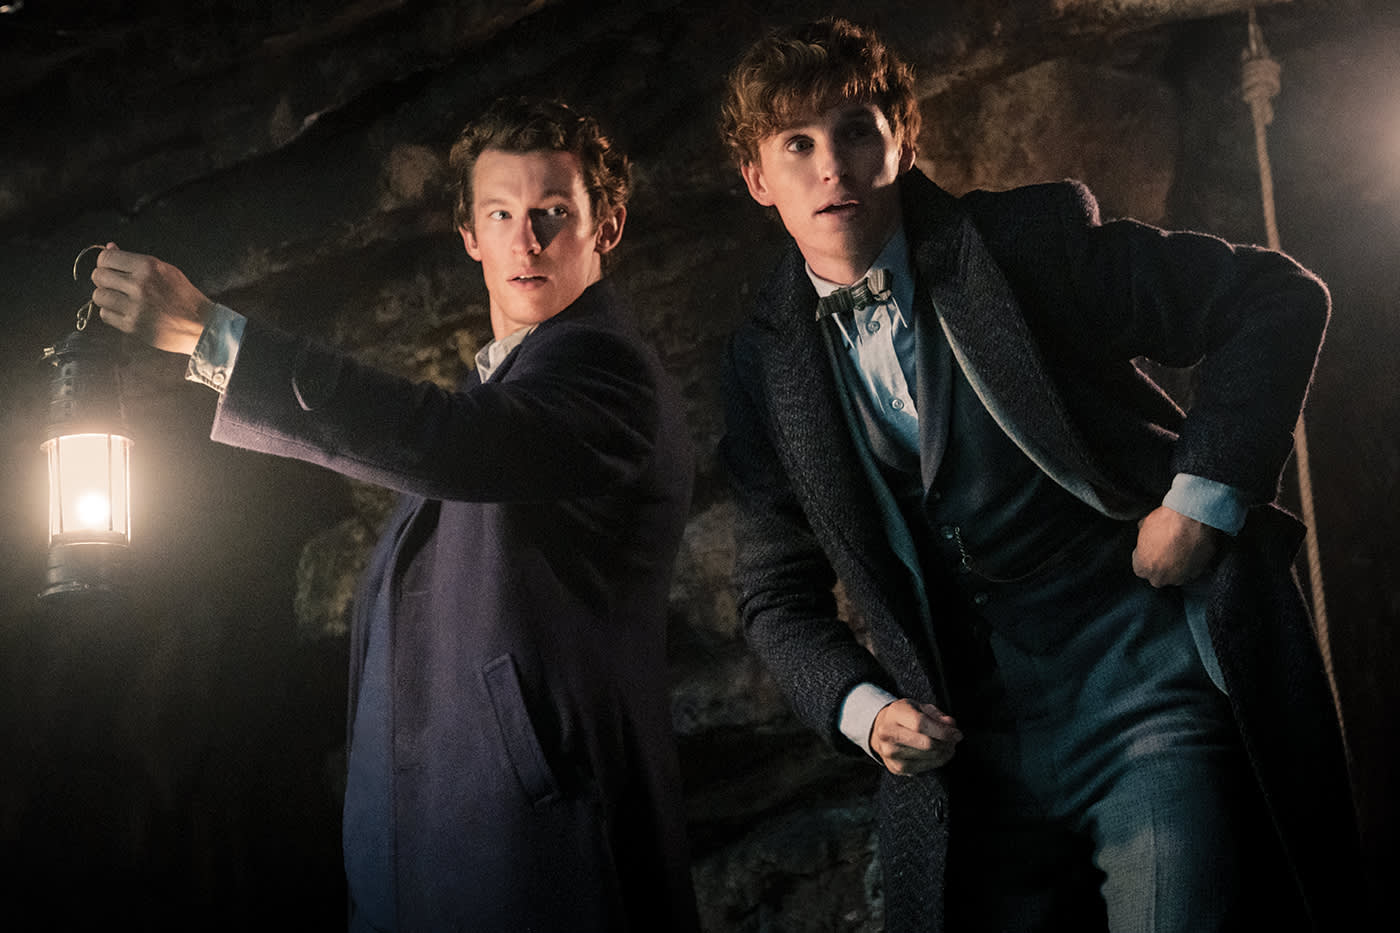 WB-FBSOD-newt-and-theseus-scamander